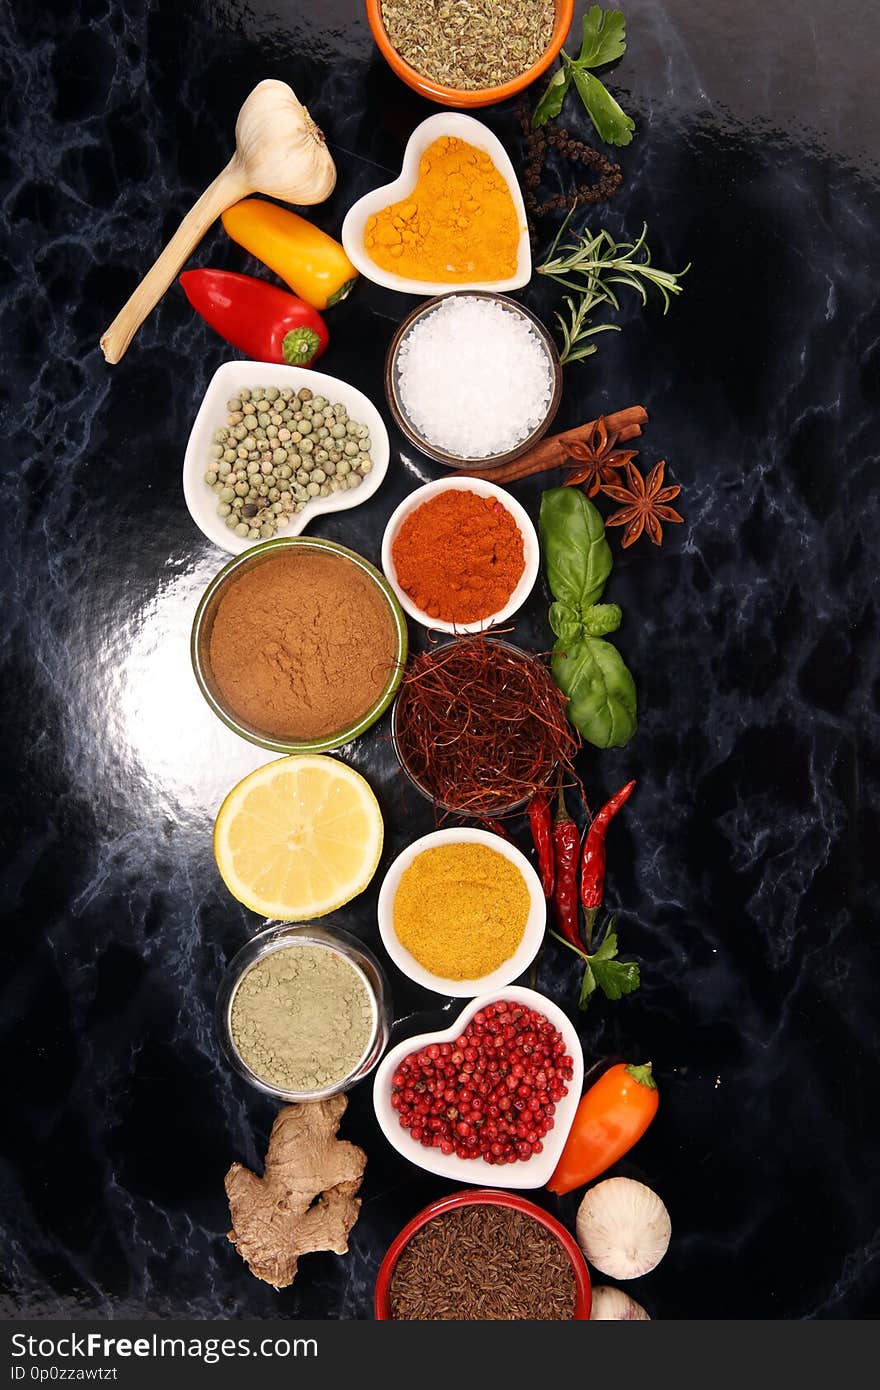 Spices and herbs on table. Food and cuisine ingredients for cooking.